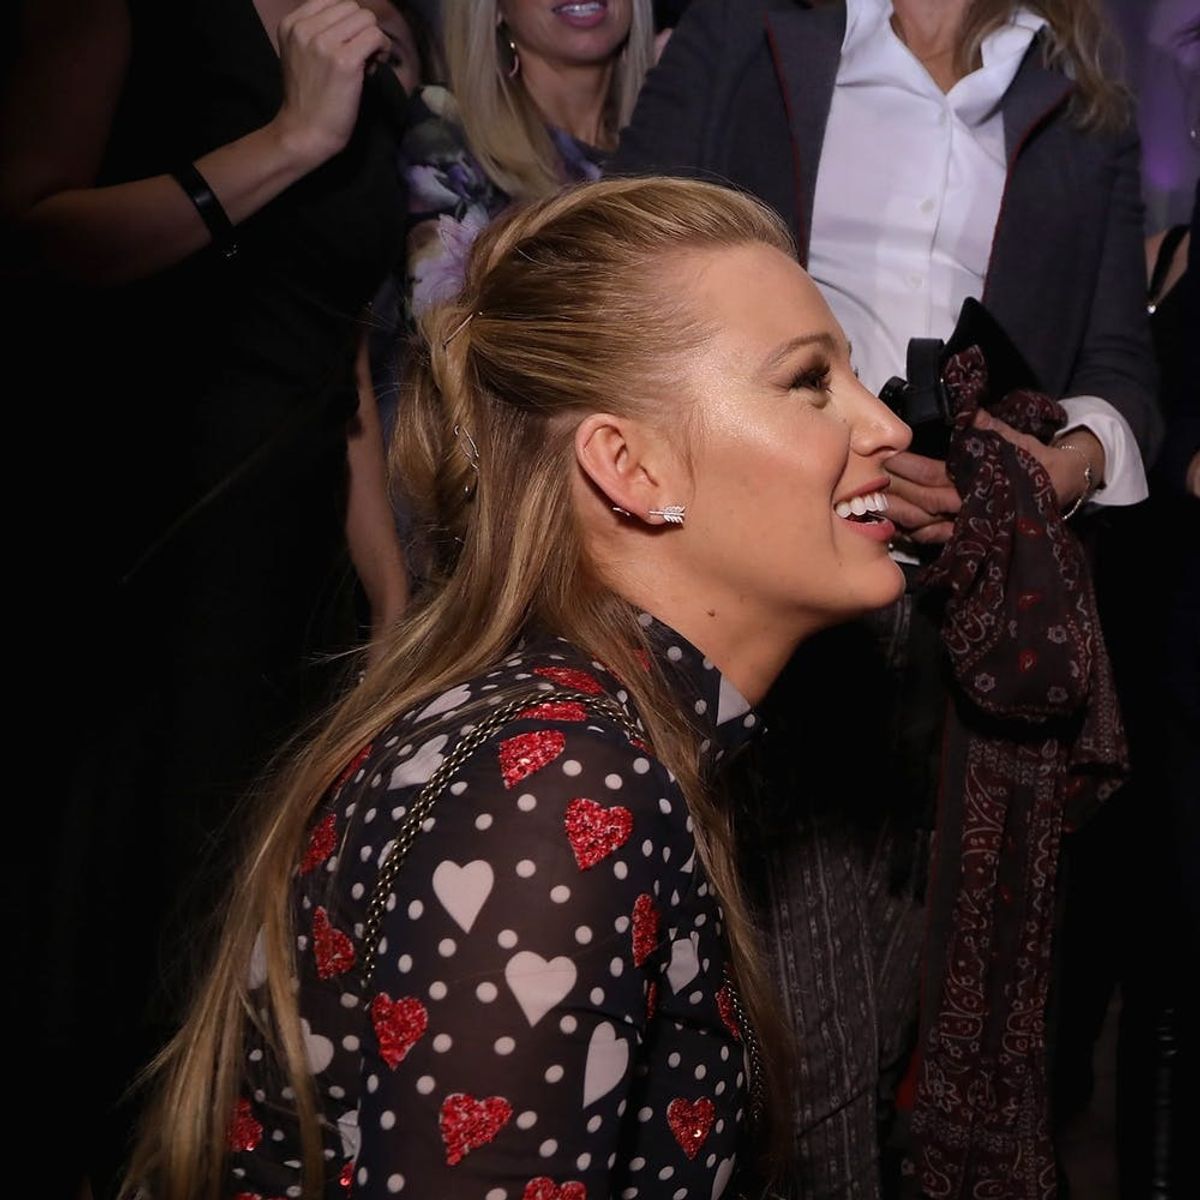 Ryan Reynolds Gave Blake Lively One $1,700 Earring for Valentine’s Day